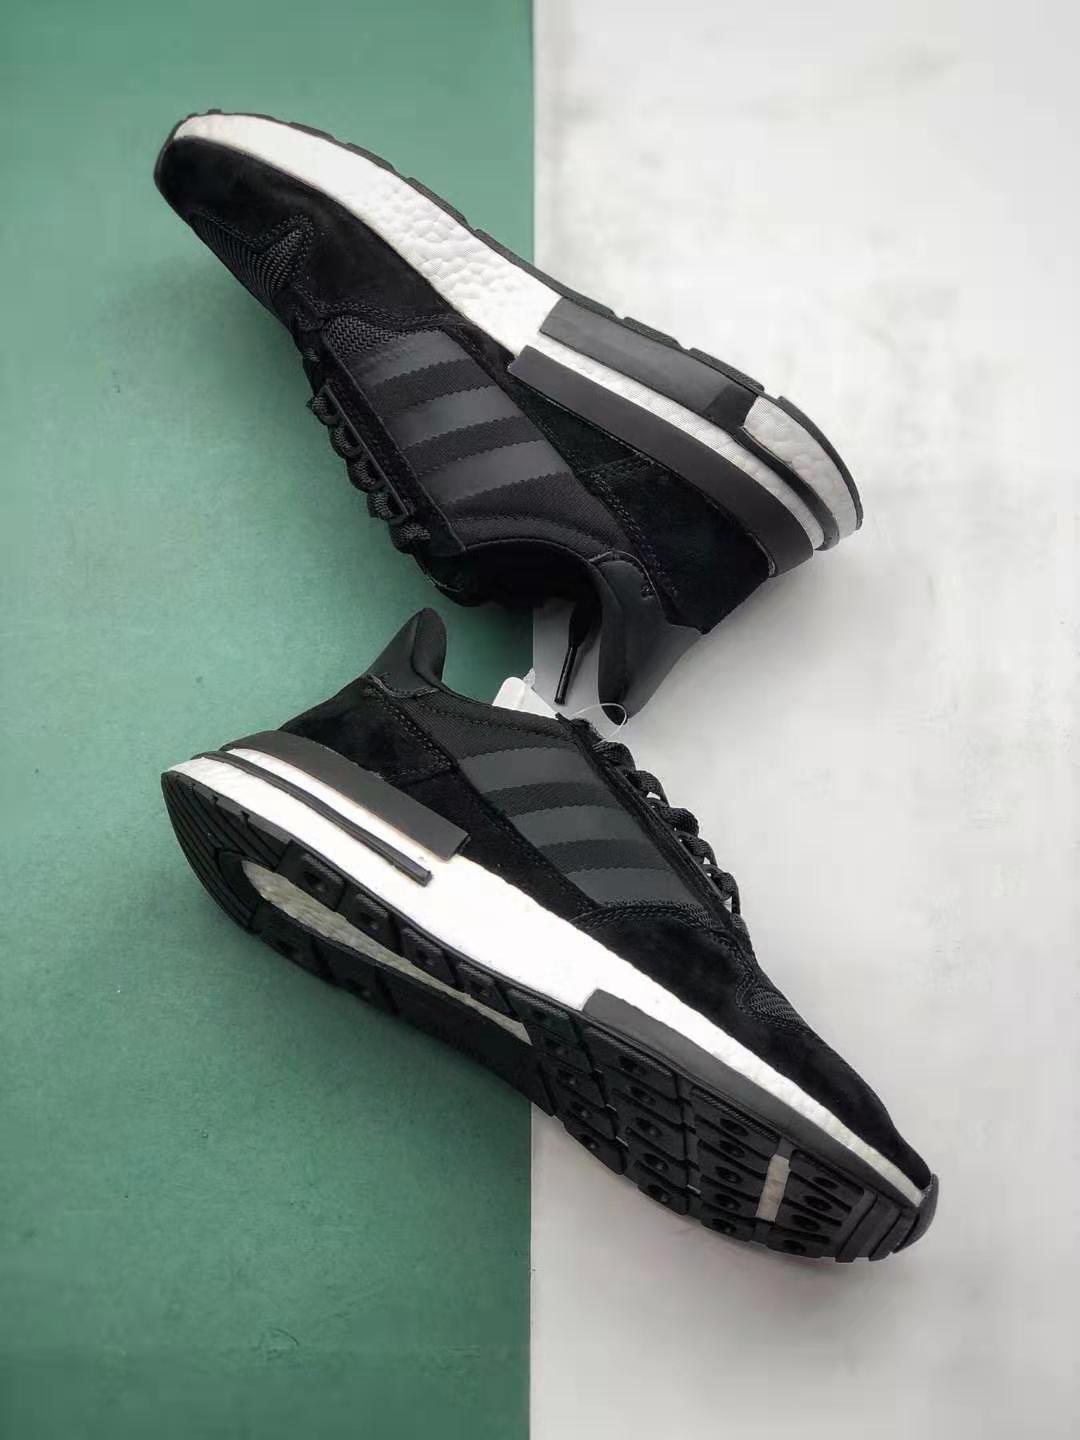 Adidas ZX 500 RM Core Black B42227 - Latest Release and Unbeatable Style